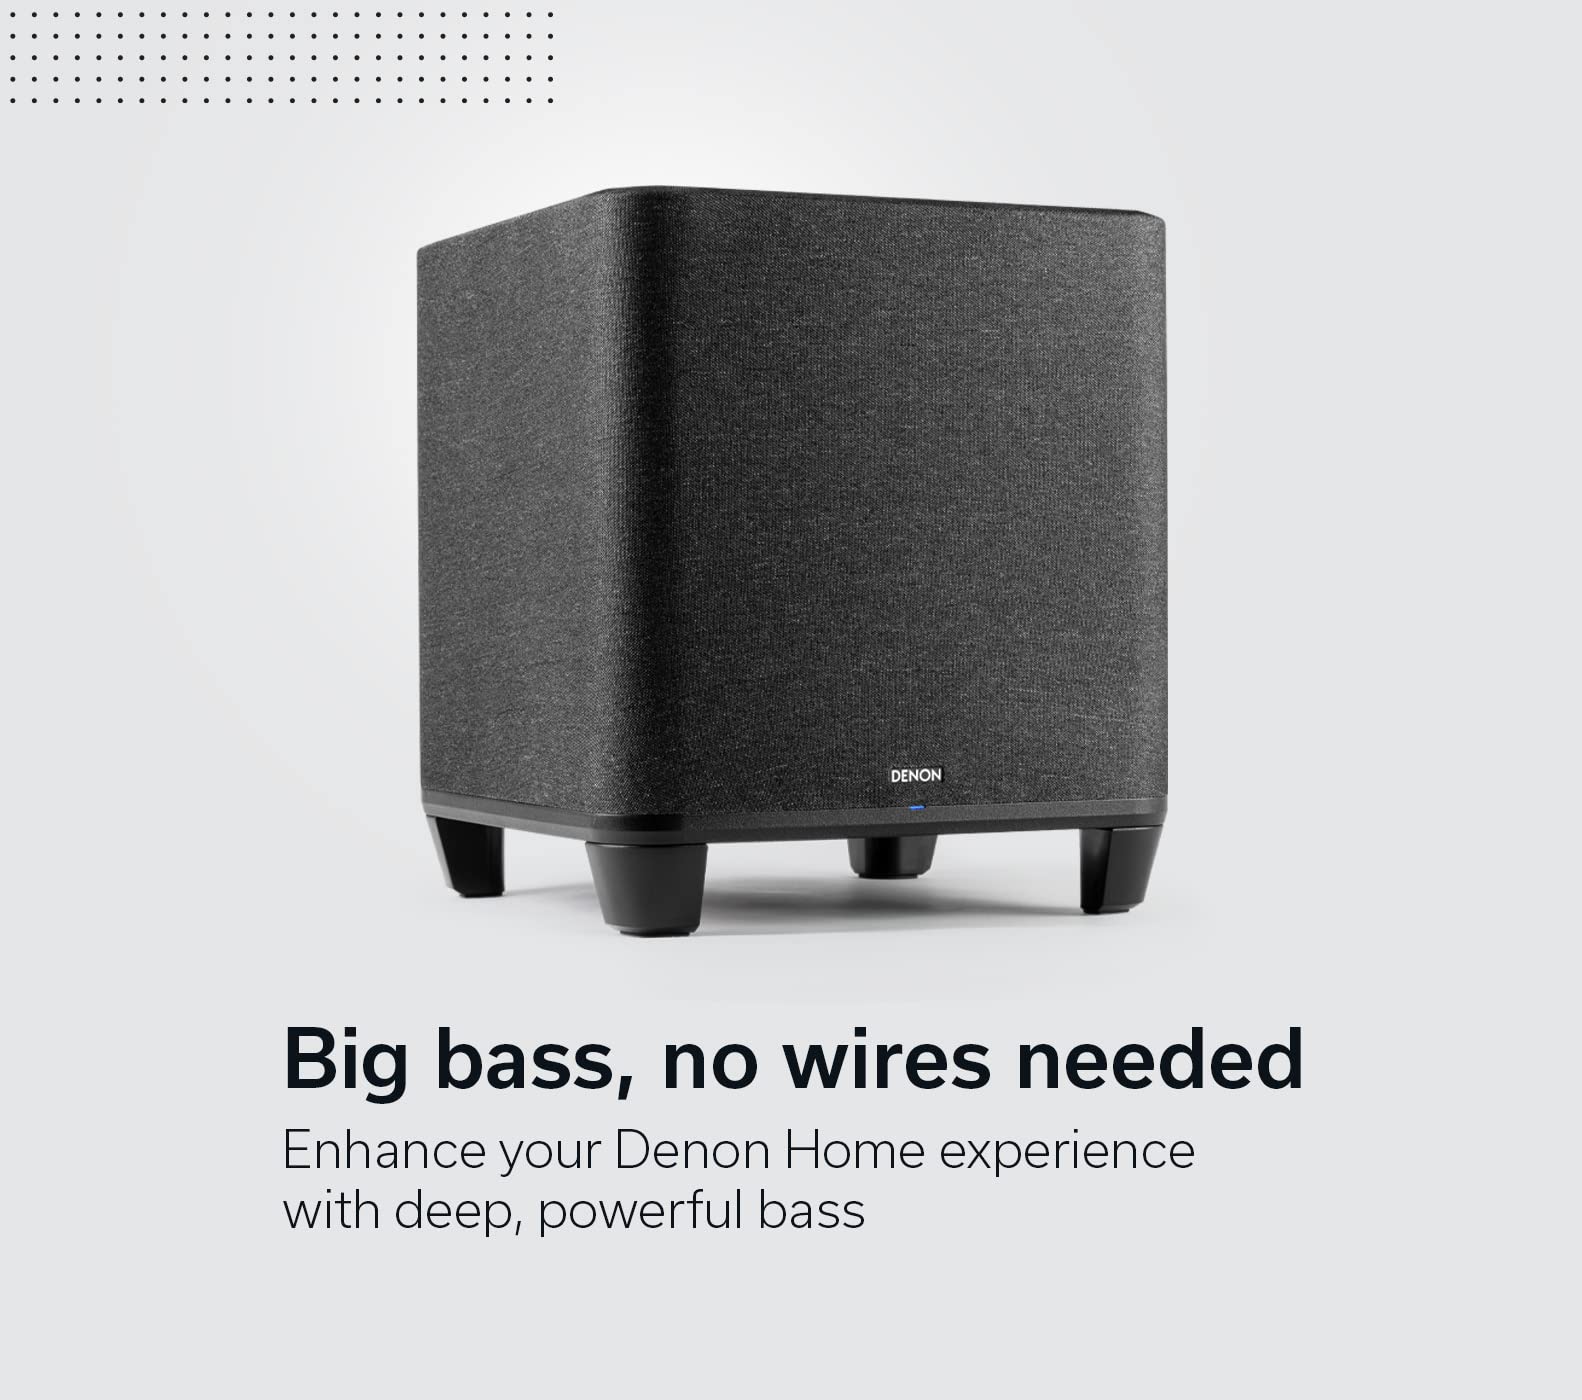 8" Denon Bass-Reflex Home Subwoofer w/ HEOS Built-In $349 + Free Shipping